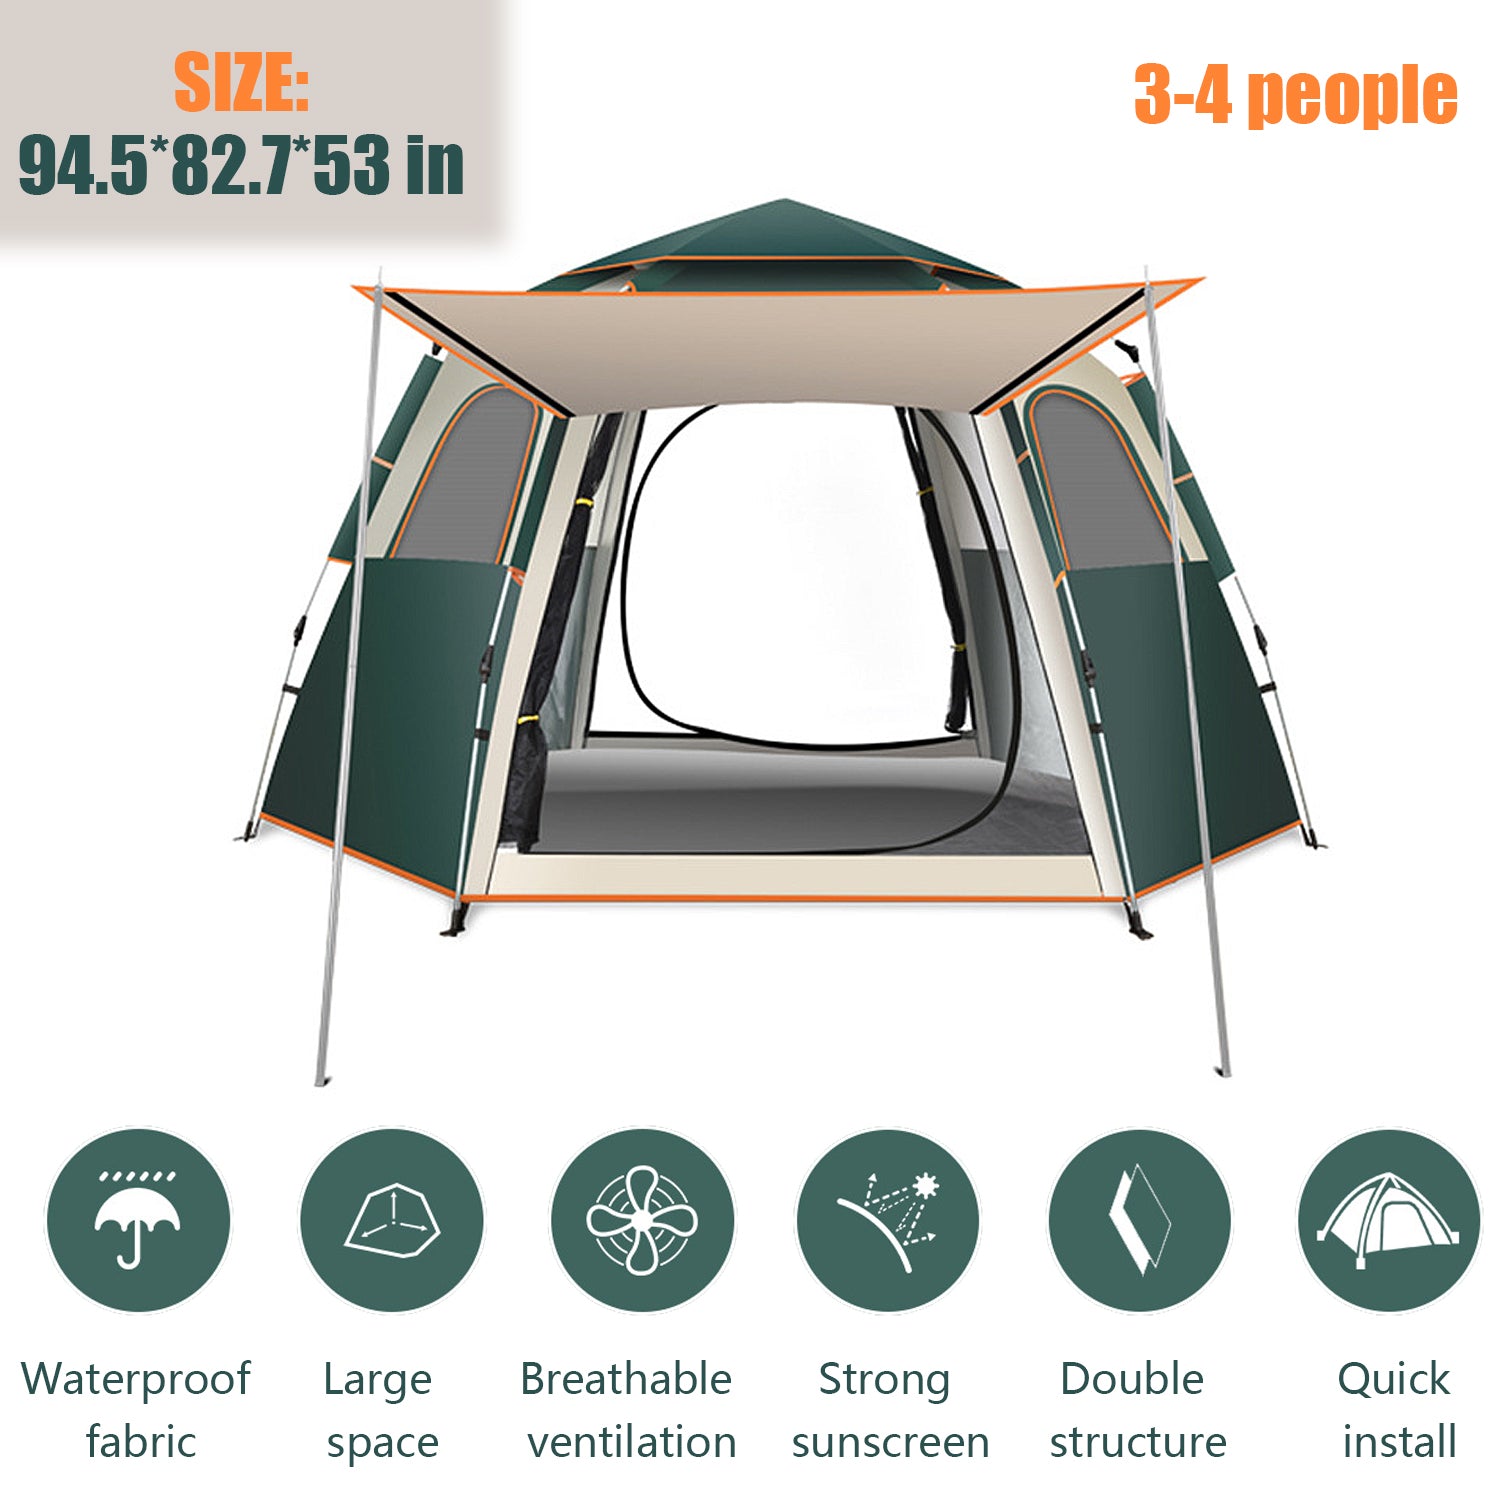 6-Person Camping Tent， Instant Pop Up Tents， Easy Set Up Family Camping Tents and Shelter， Lightweight Waterproof All-Season Tent for Family Travel Hiking Camping Mountaineering Outdoor